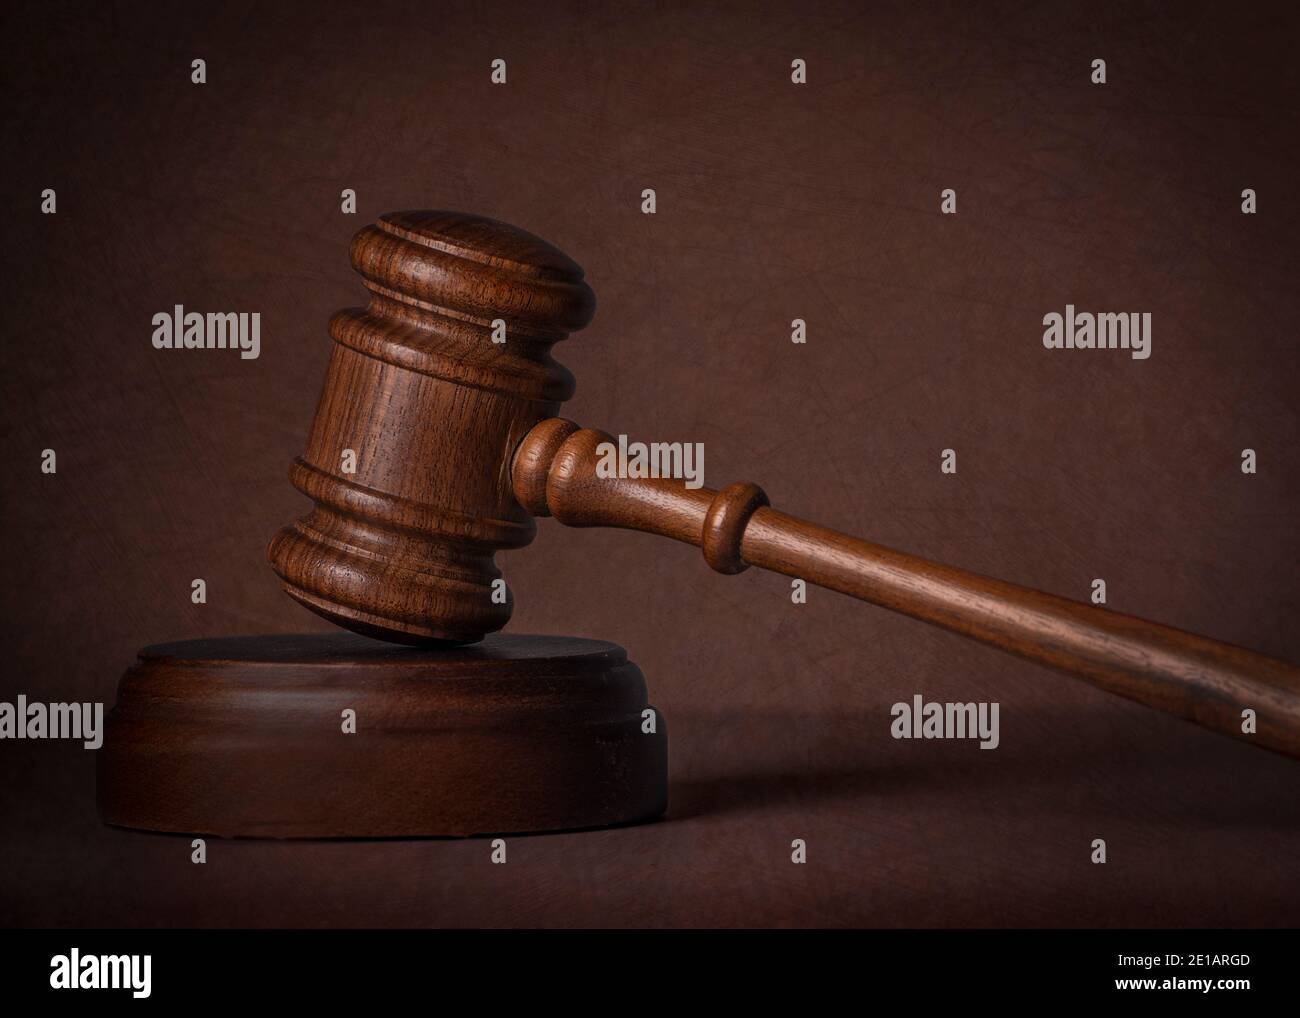 Justice - a wooden judge's gavel Stock Photo